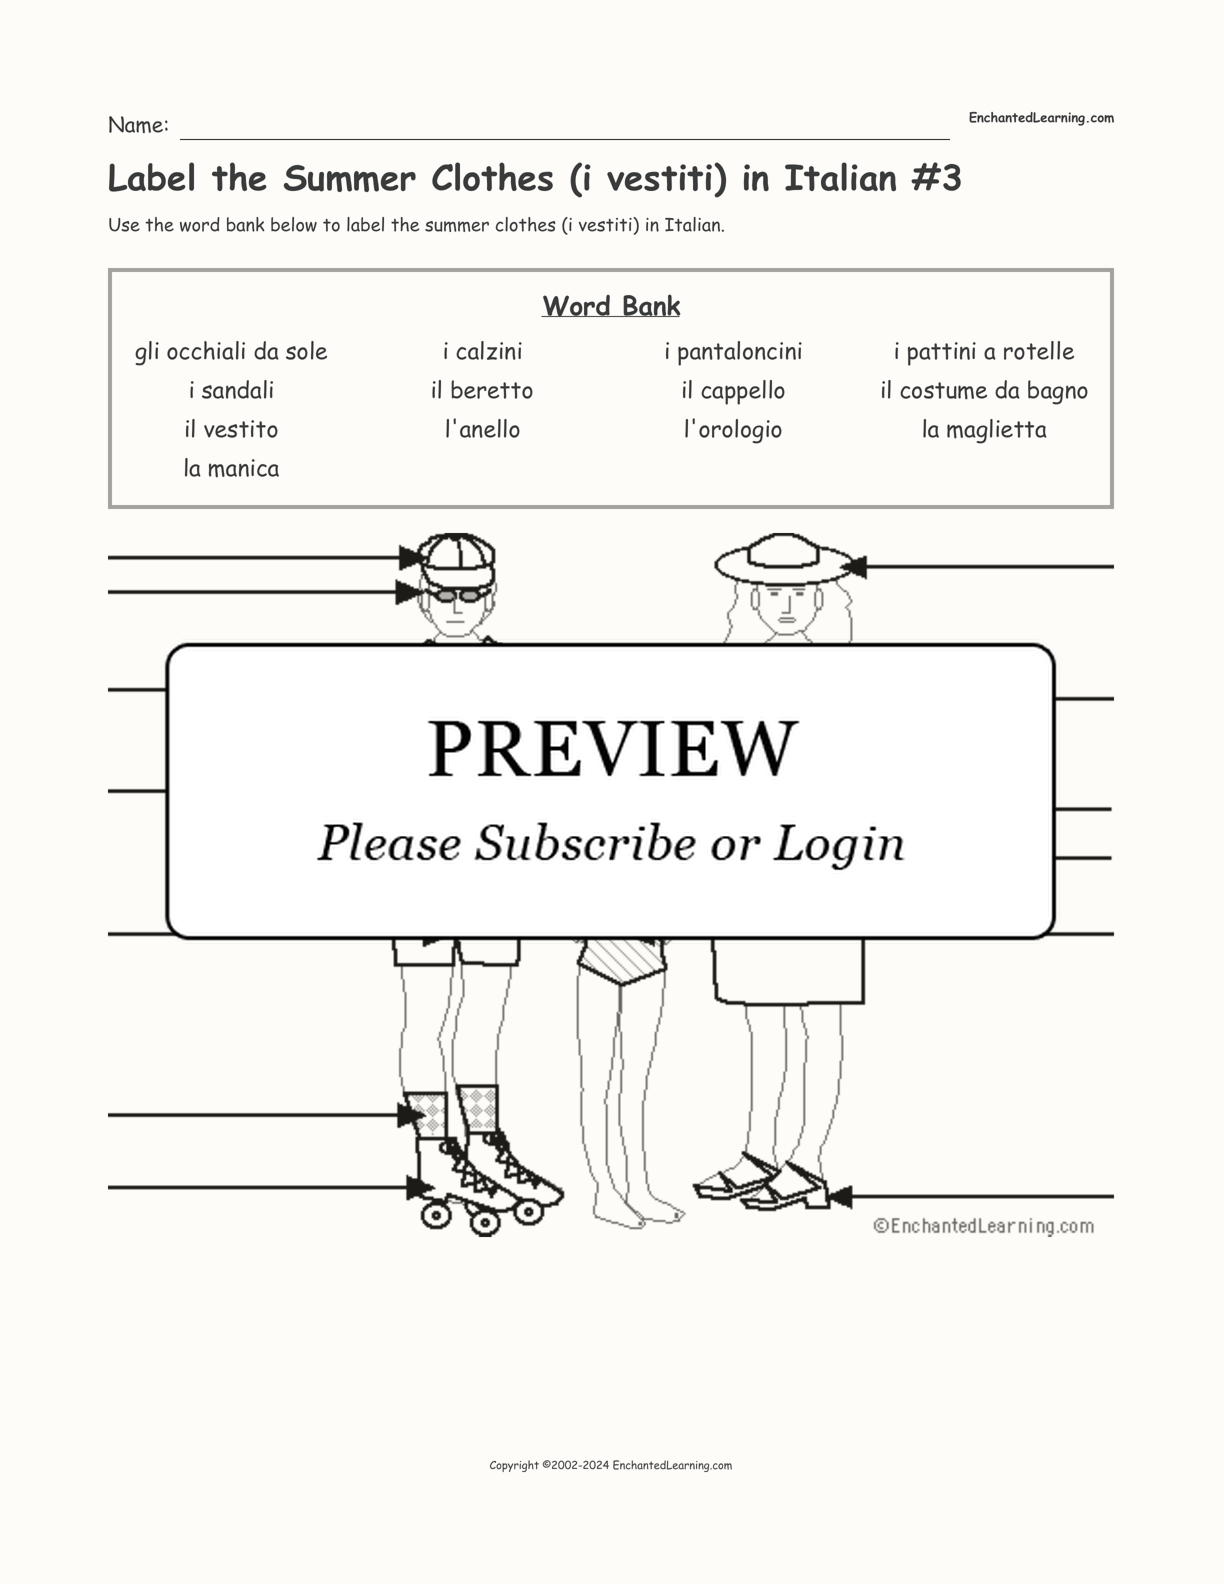 Label the Summer Clothes (i vestiti) in Italian #3 interactive worksheet page 1